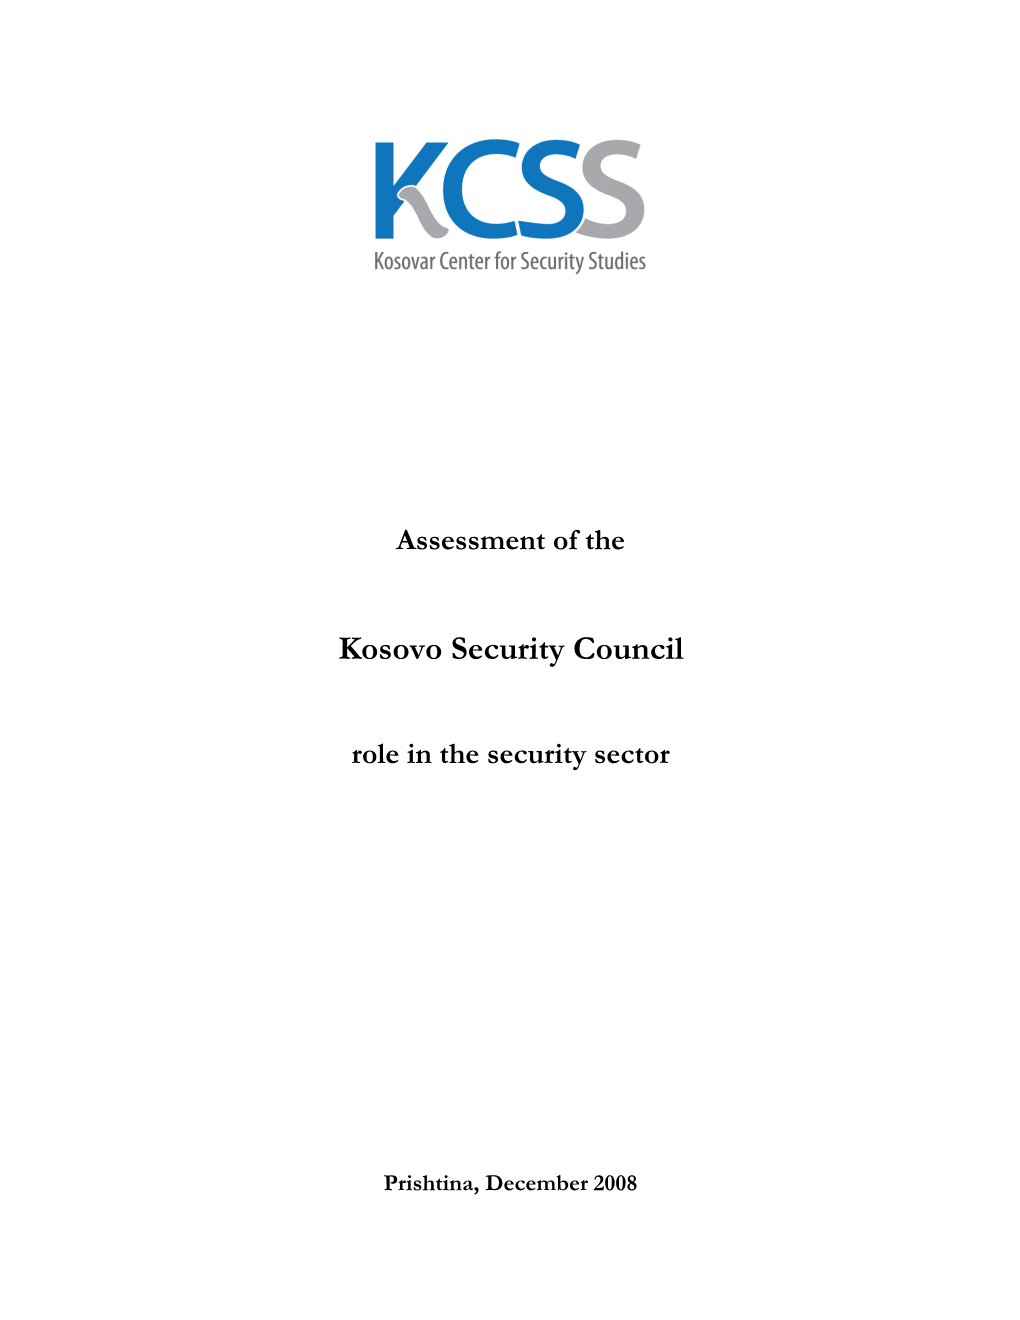 Kosovo Security Council Role in the Security Sector